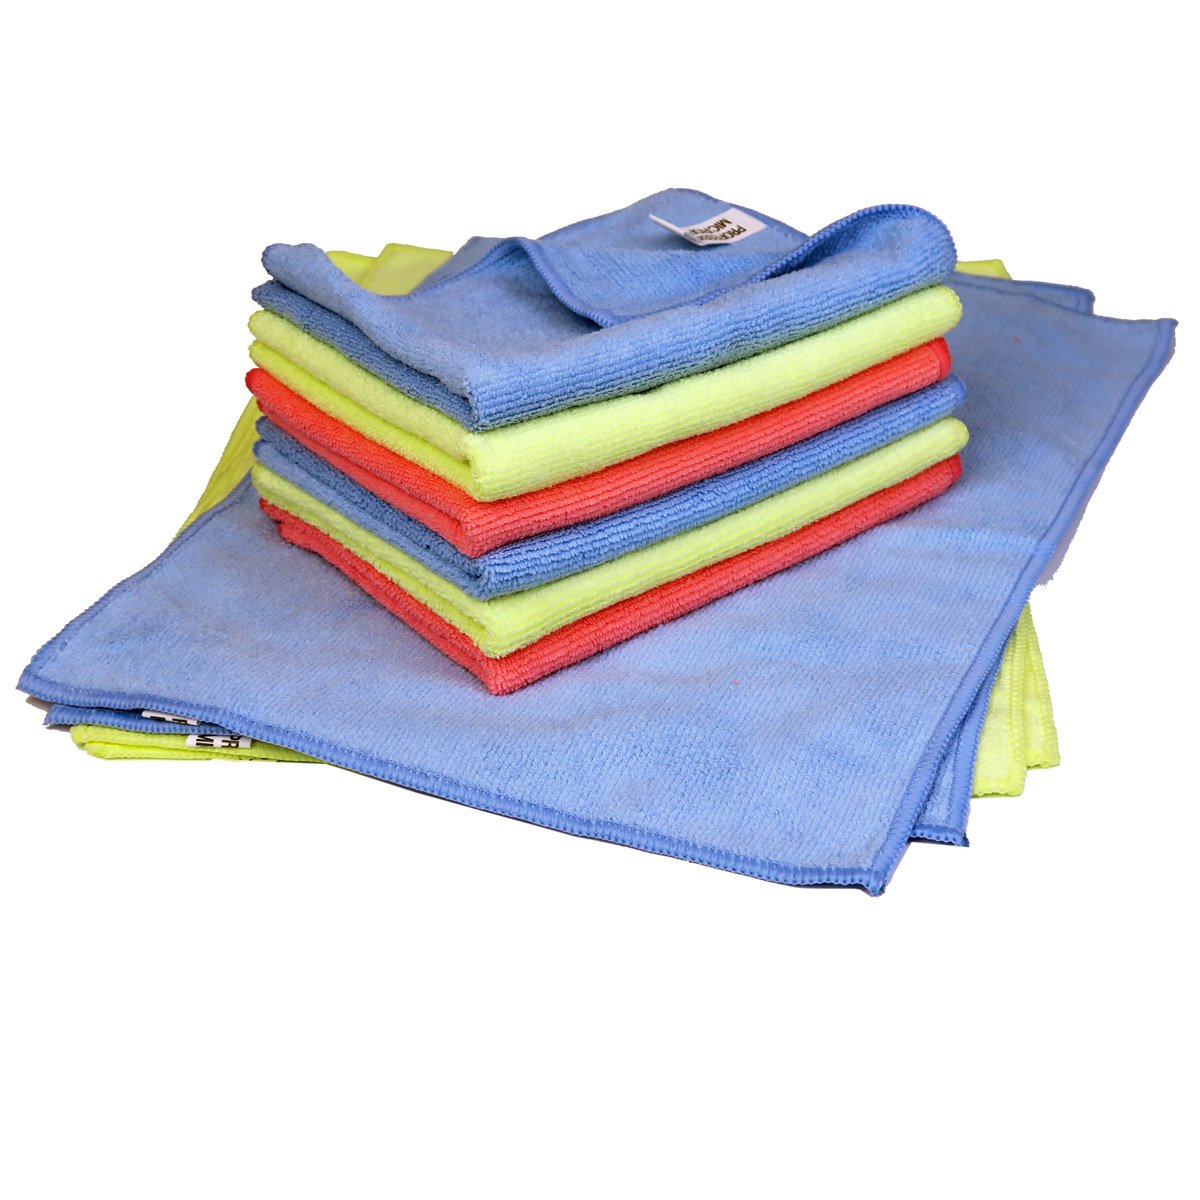 Microfibre Cleaning & Drying Towel 30cms x 40cms - 20 pack